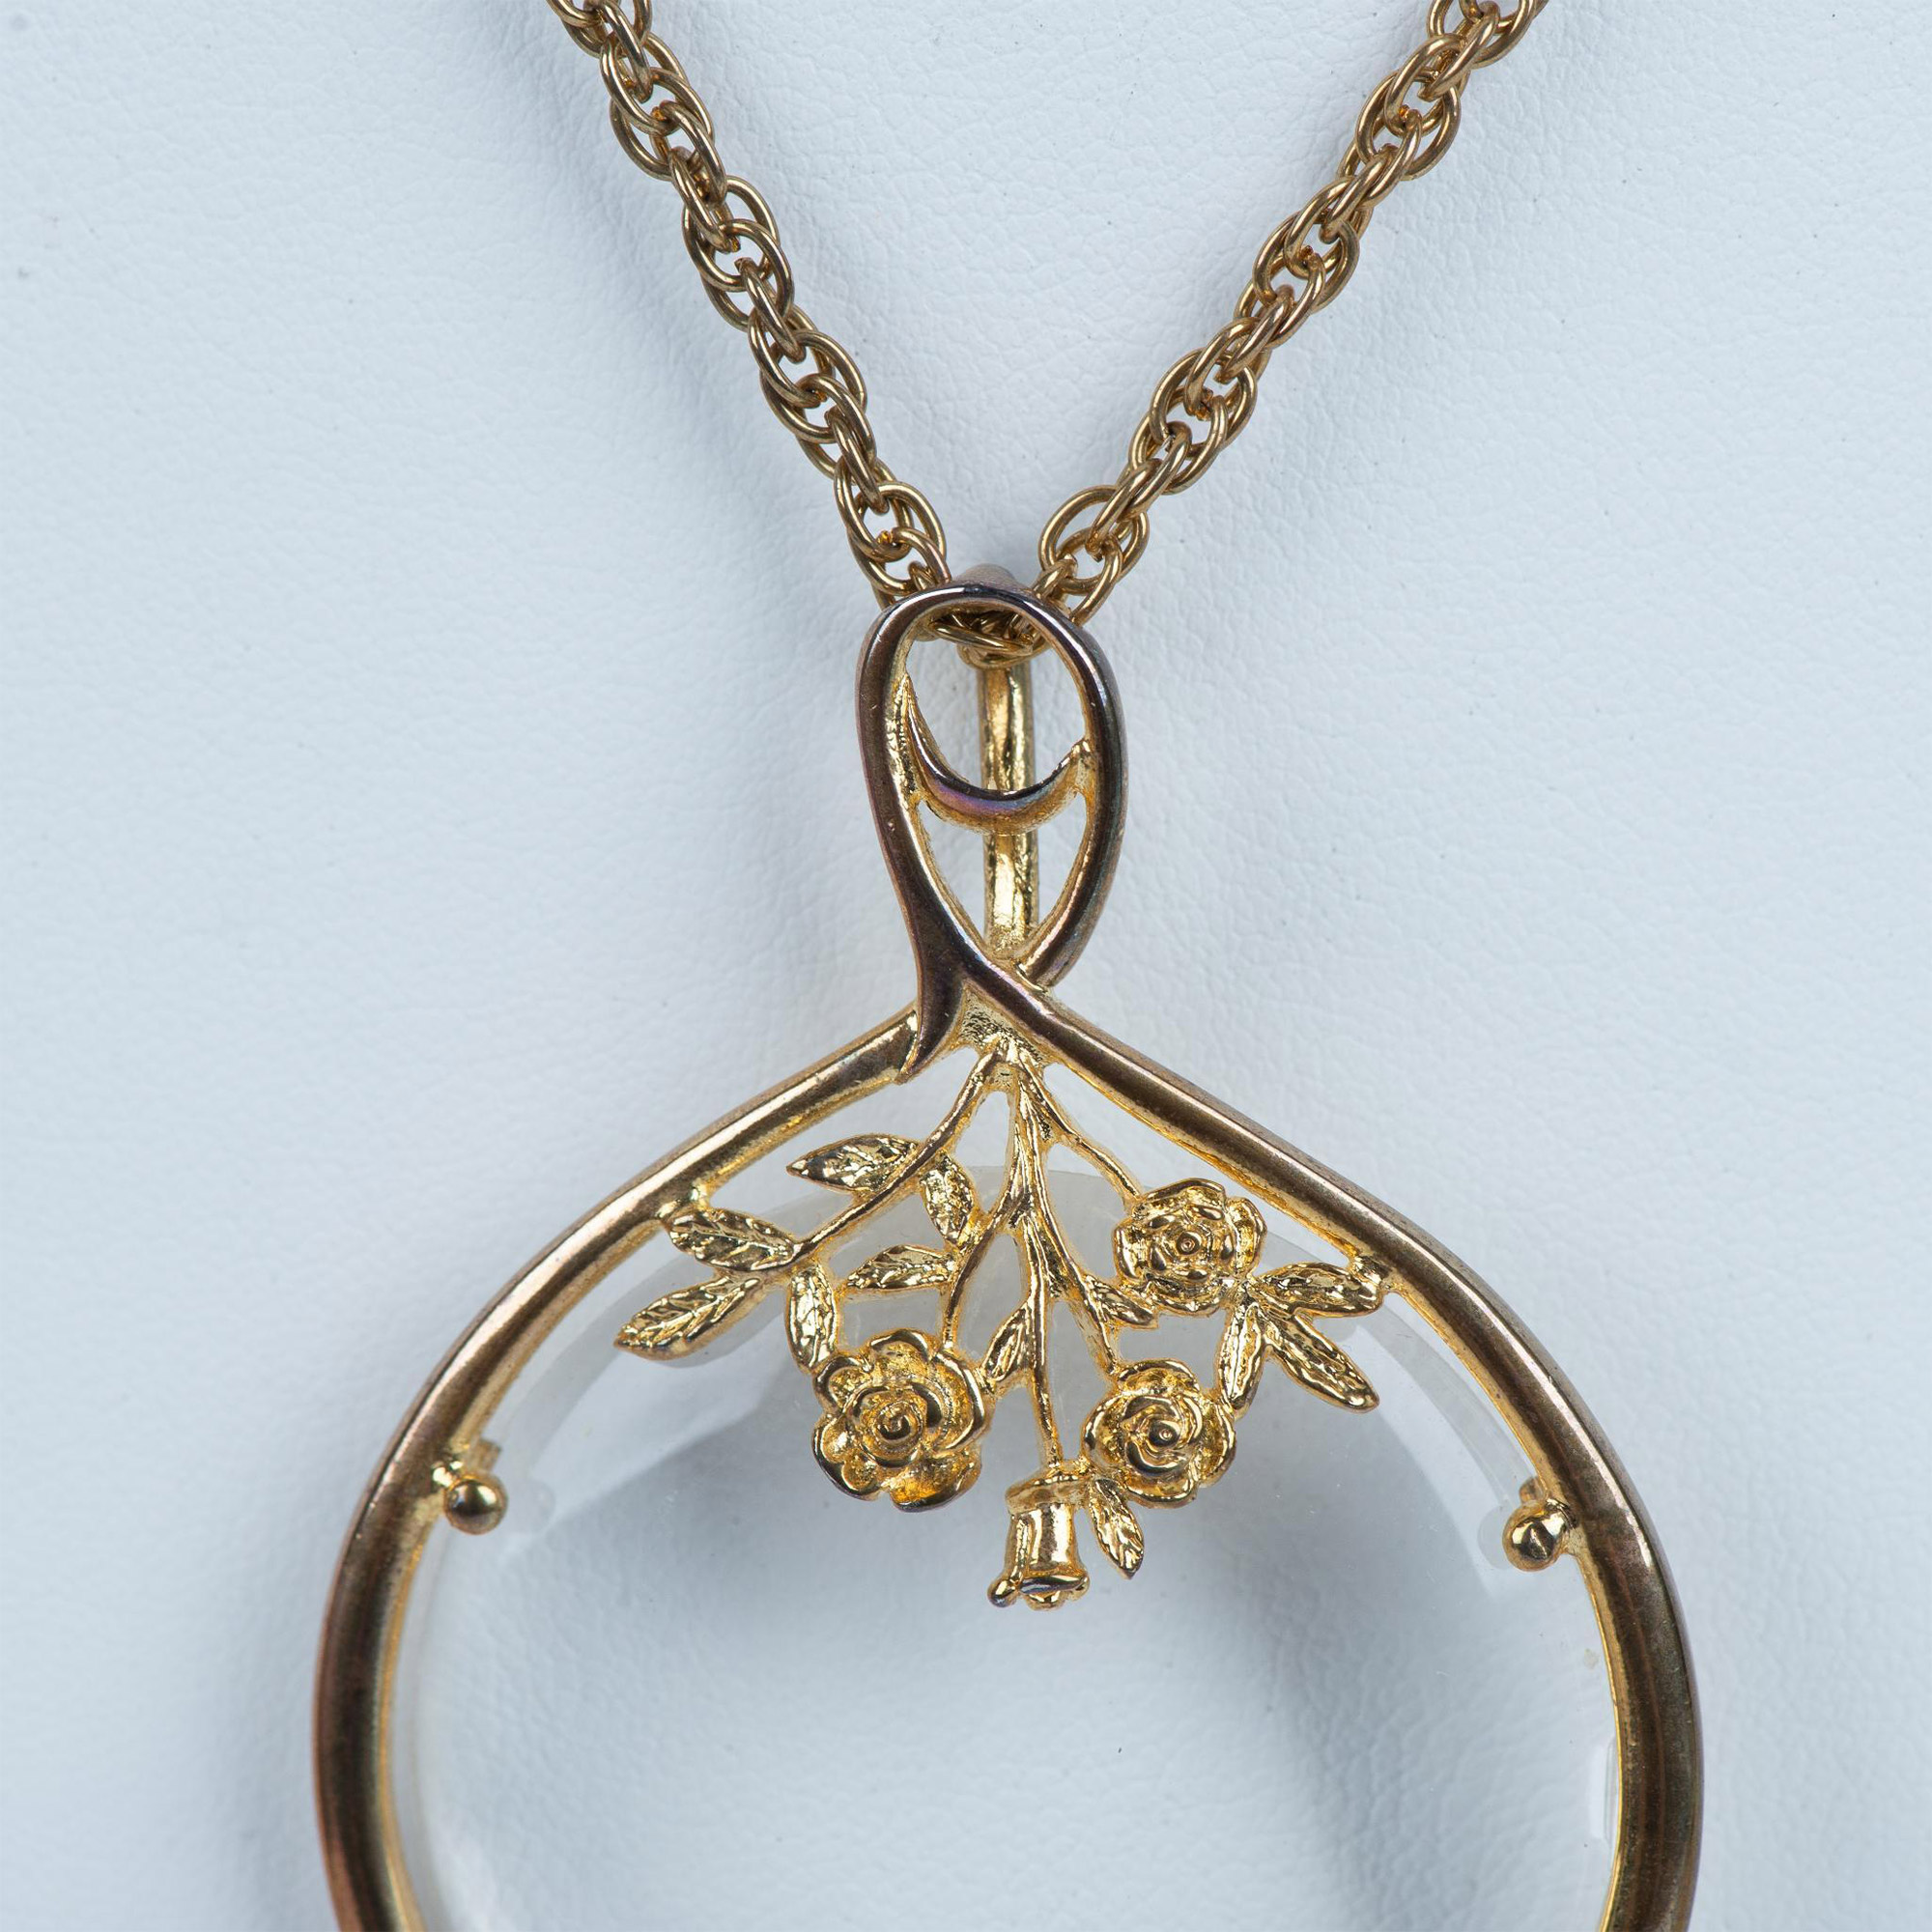 Vintage Gold Tone Floral Magnifying Glass Necklace - Image 3 of 4